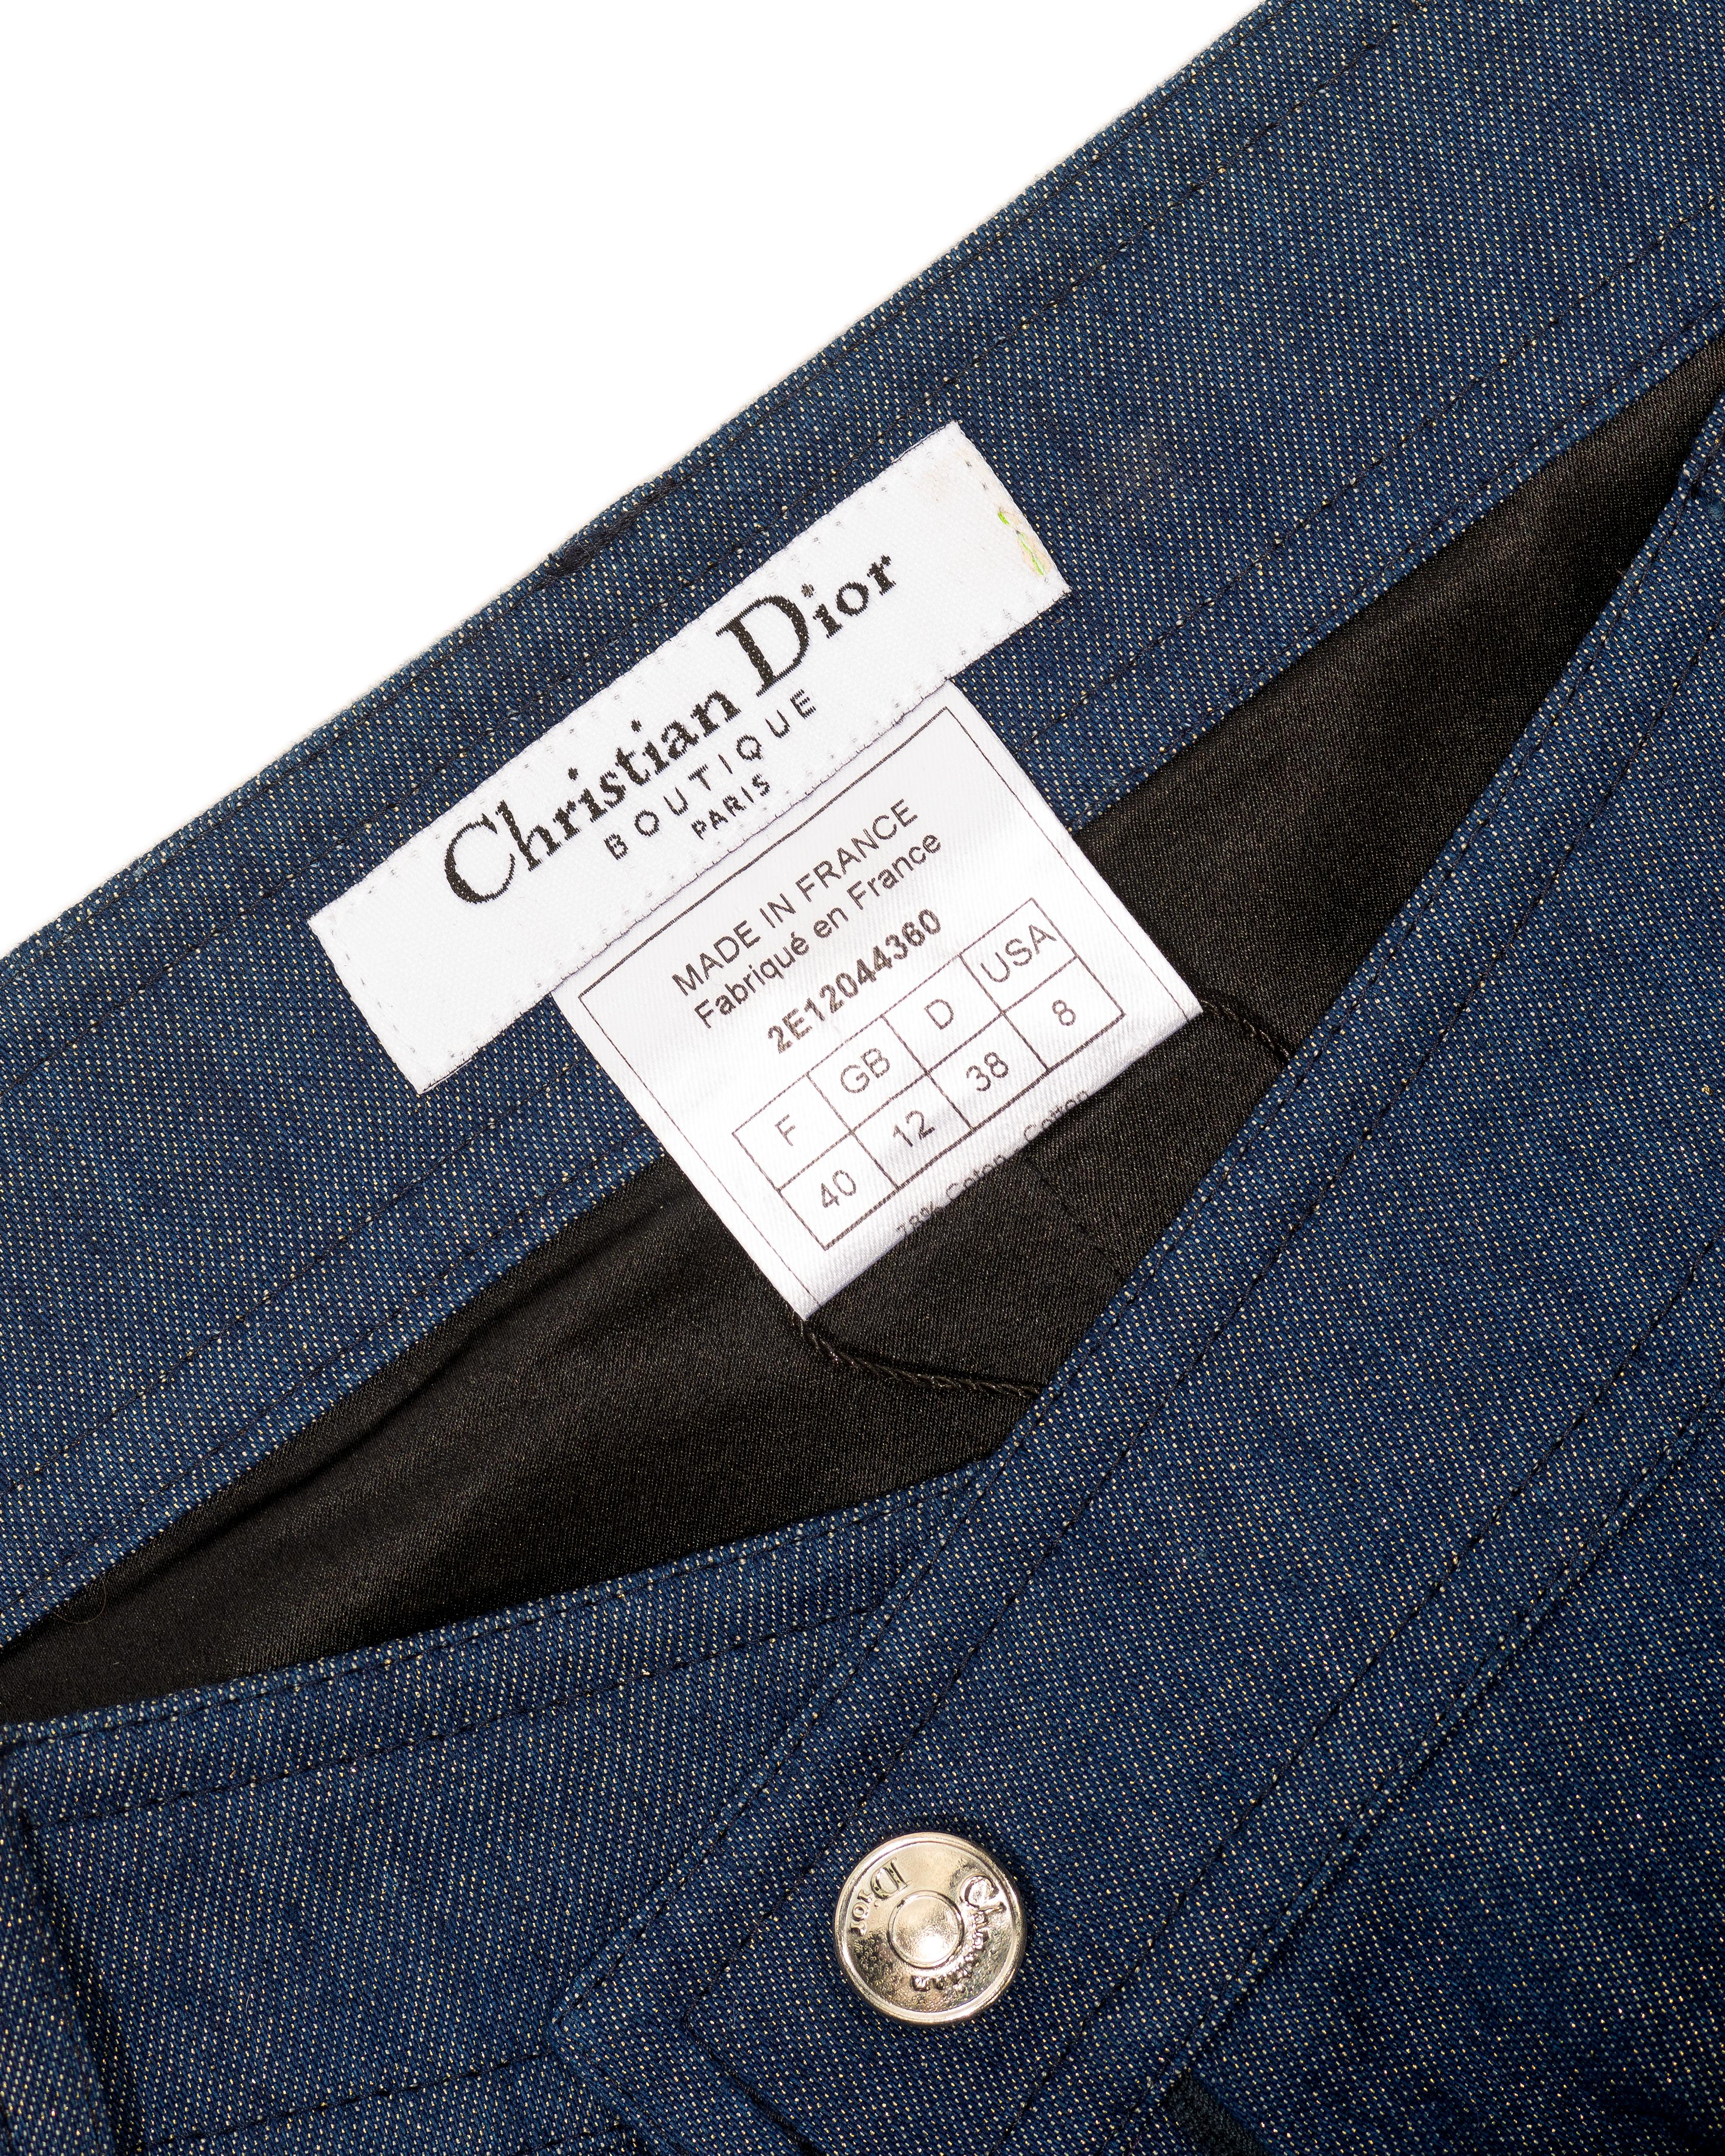 Christian Dior by John Galliano Lurex Denim Embellished Skinny Jeans, SS 2002 For Sale 5